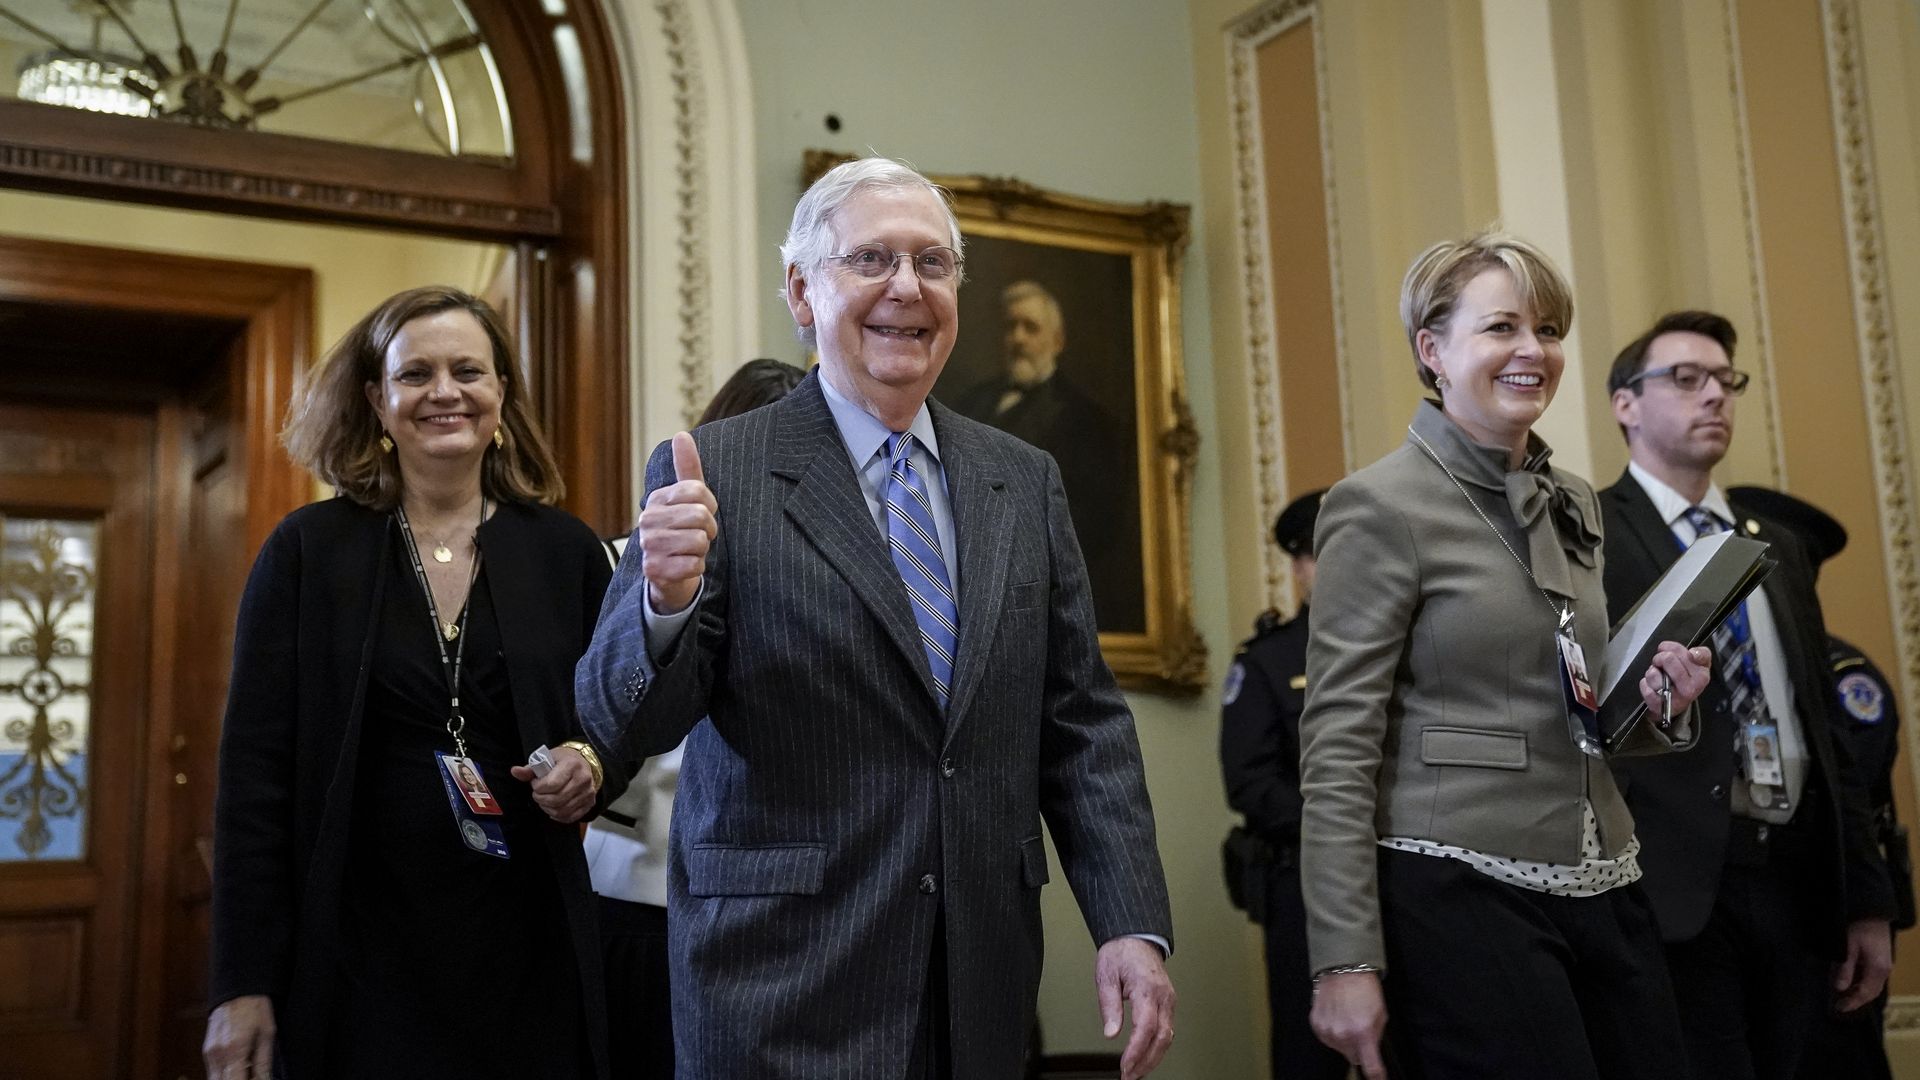 Senate Majority Leader Mitch McConnell (R-KY) gives the thumbs up as he leaves the Senate chamber.